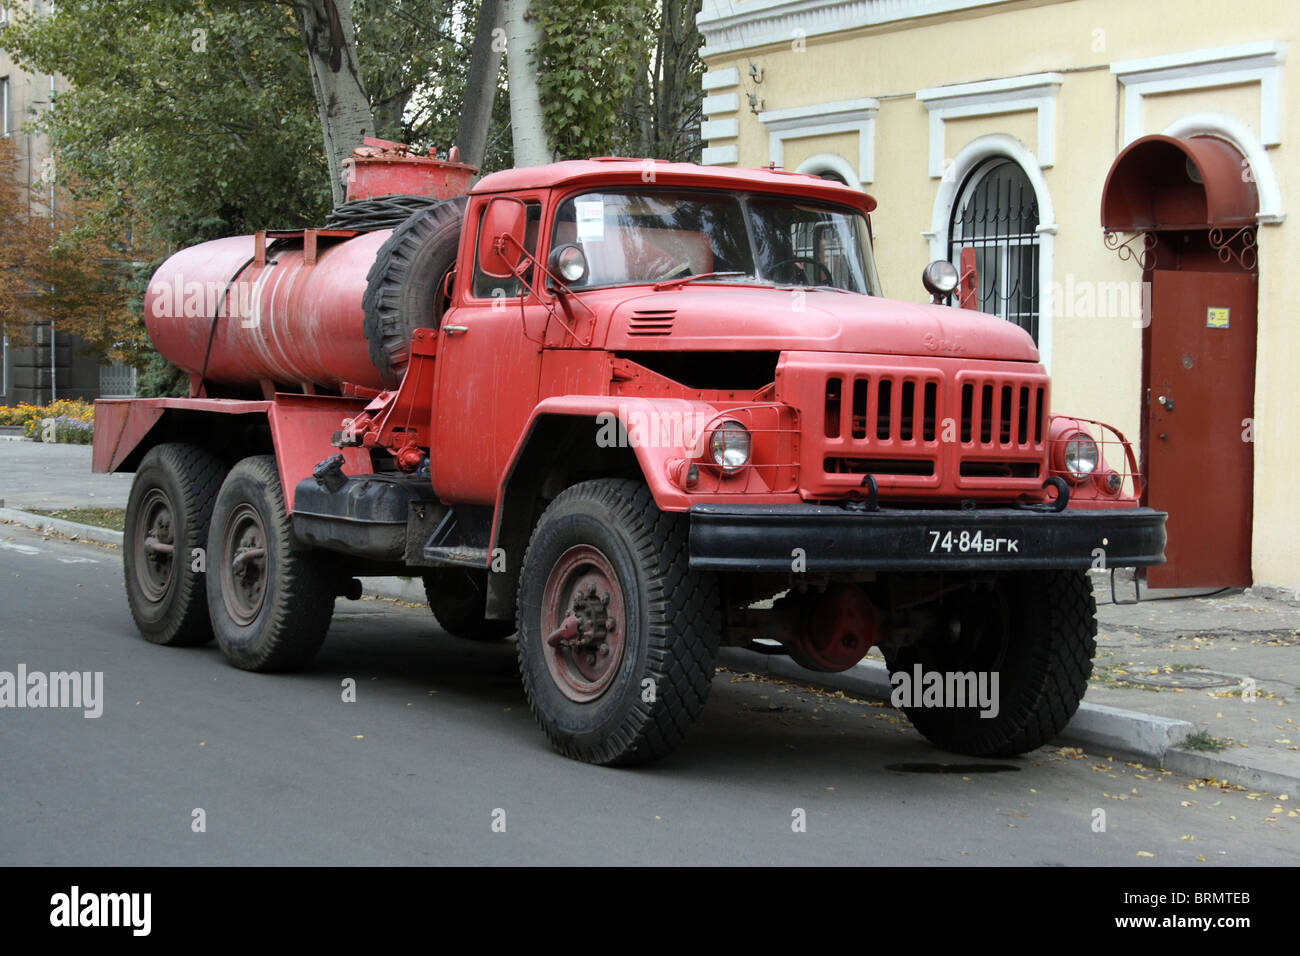 The old fire truck on the basis of ZIL Stock Photo